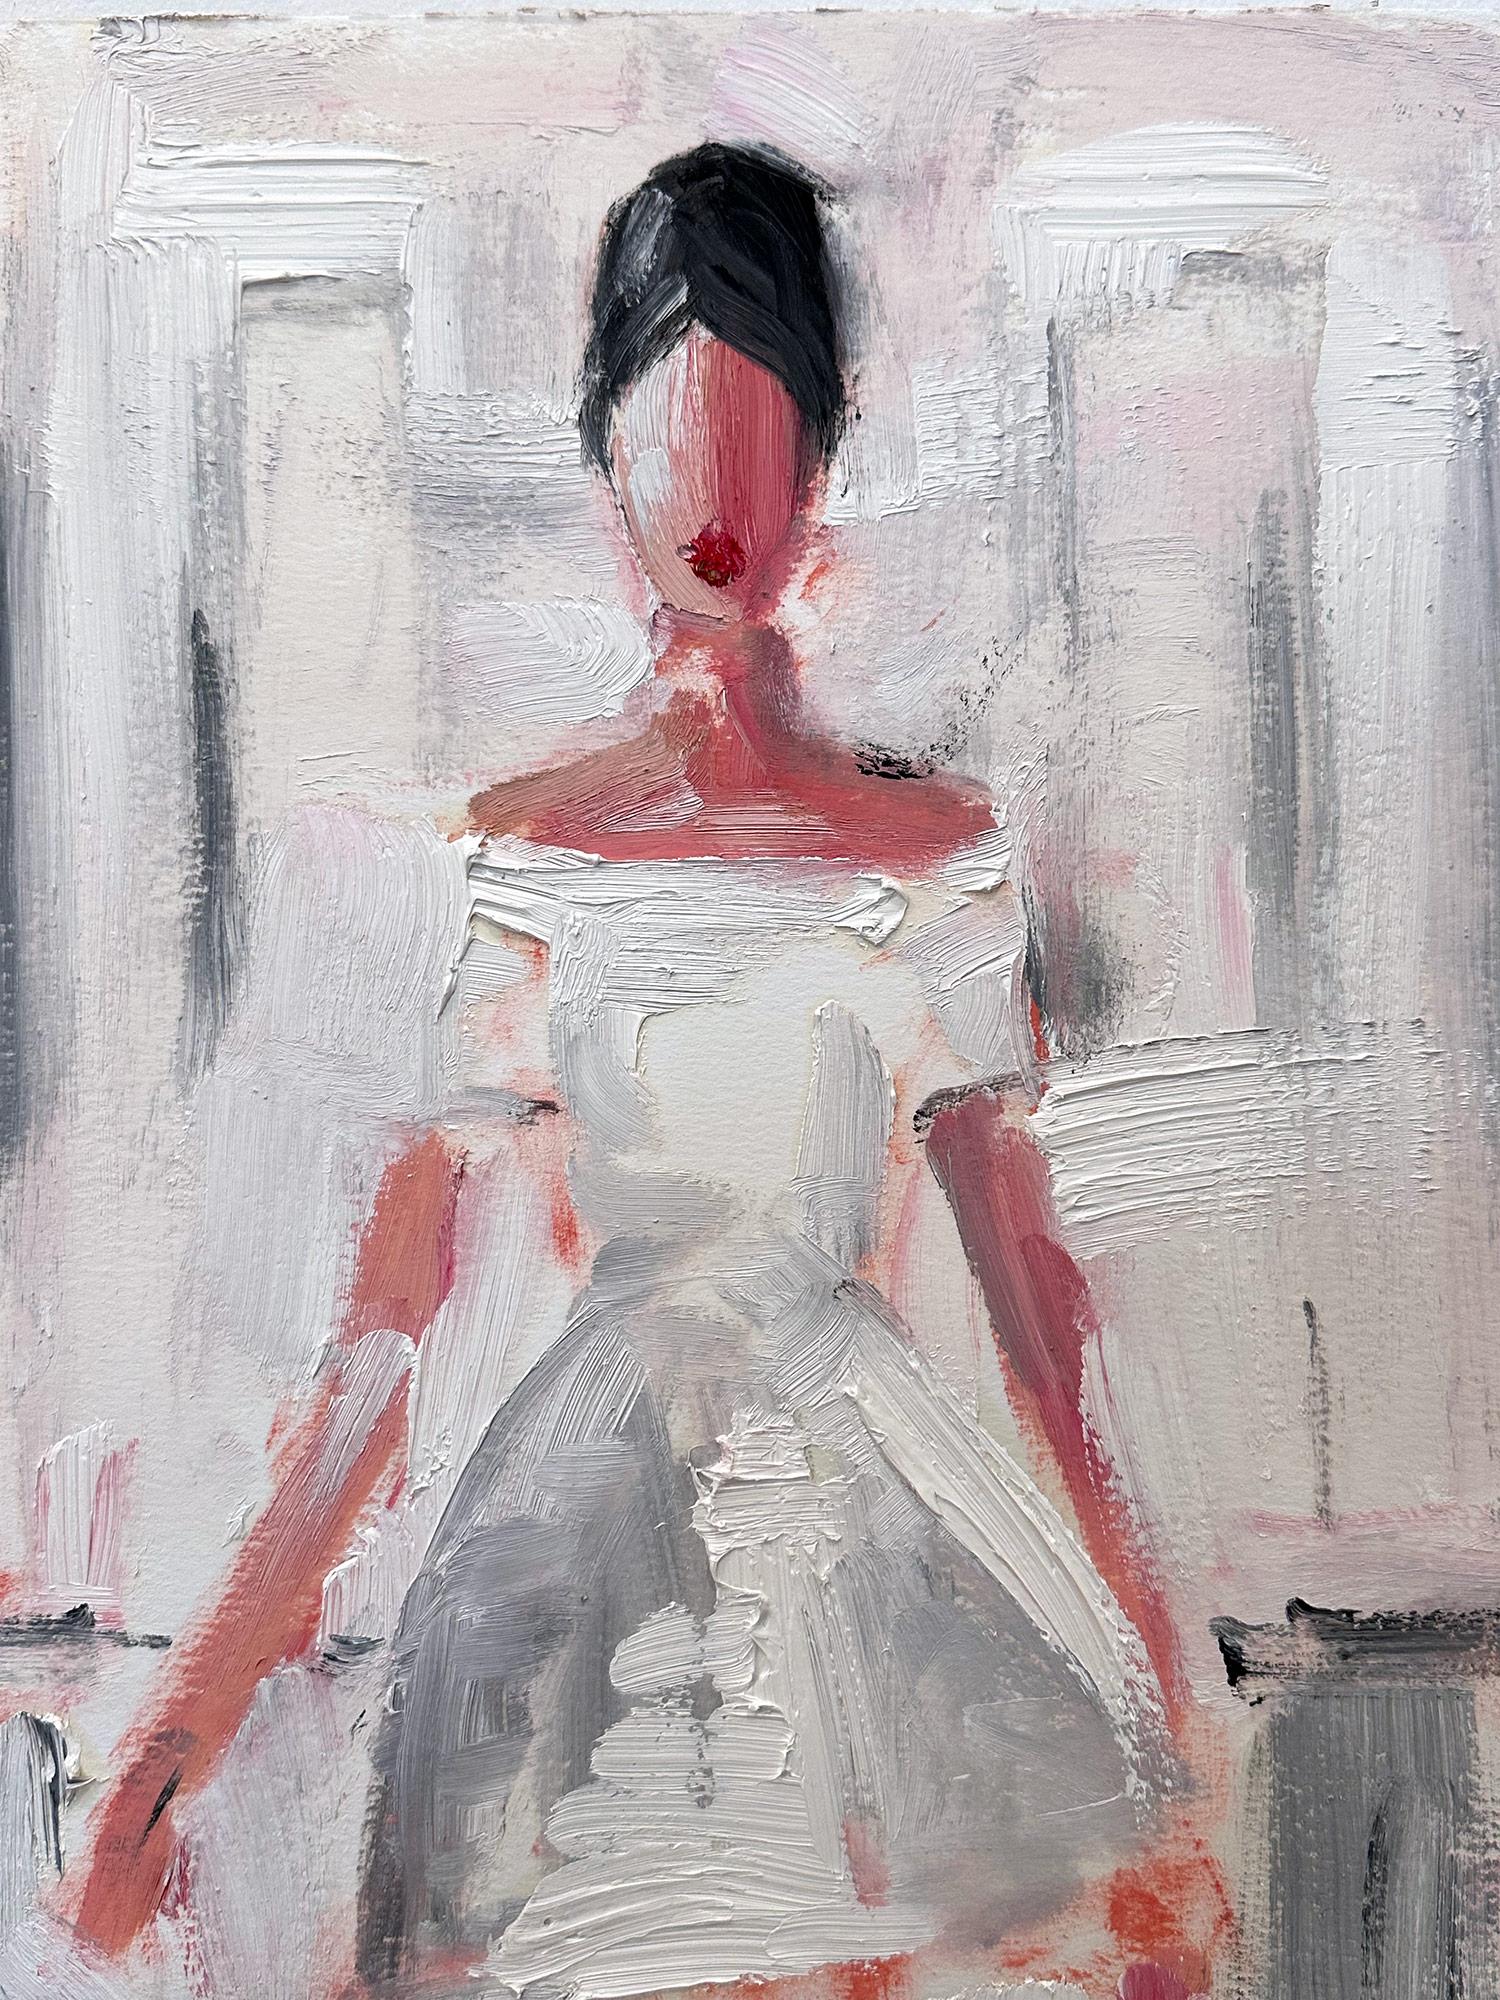 Exploring the purity of the feminine form and the excitement of High-End Fashion, artist Cindy Shaoul creates a dialogue between the figurative and the abstract. Her spirited compositions are both dramatic and invigorating, capturing the fleeting